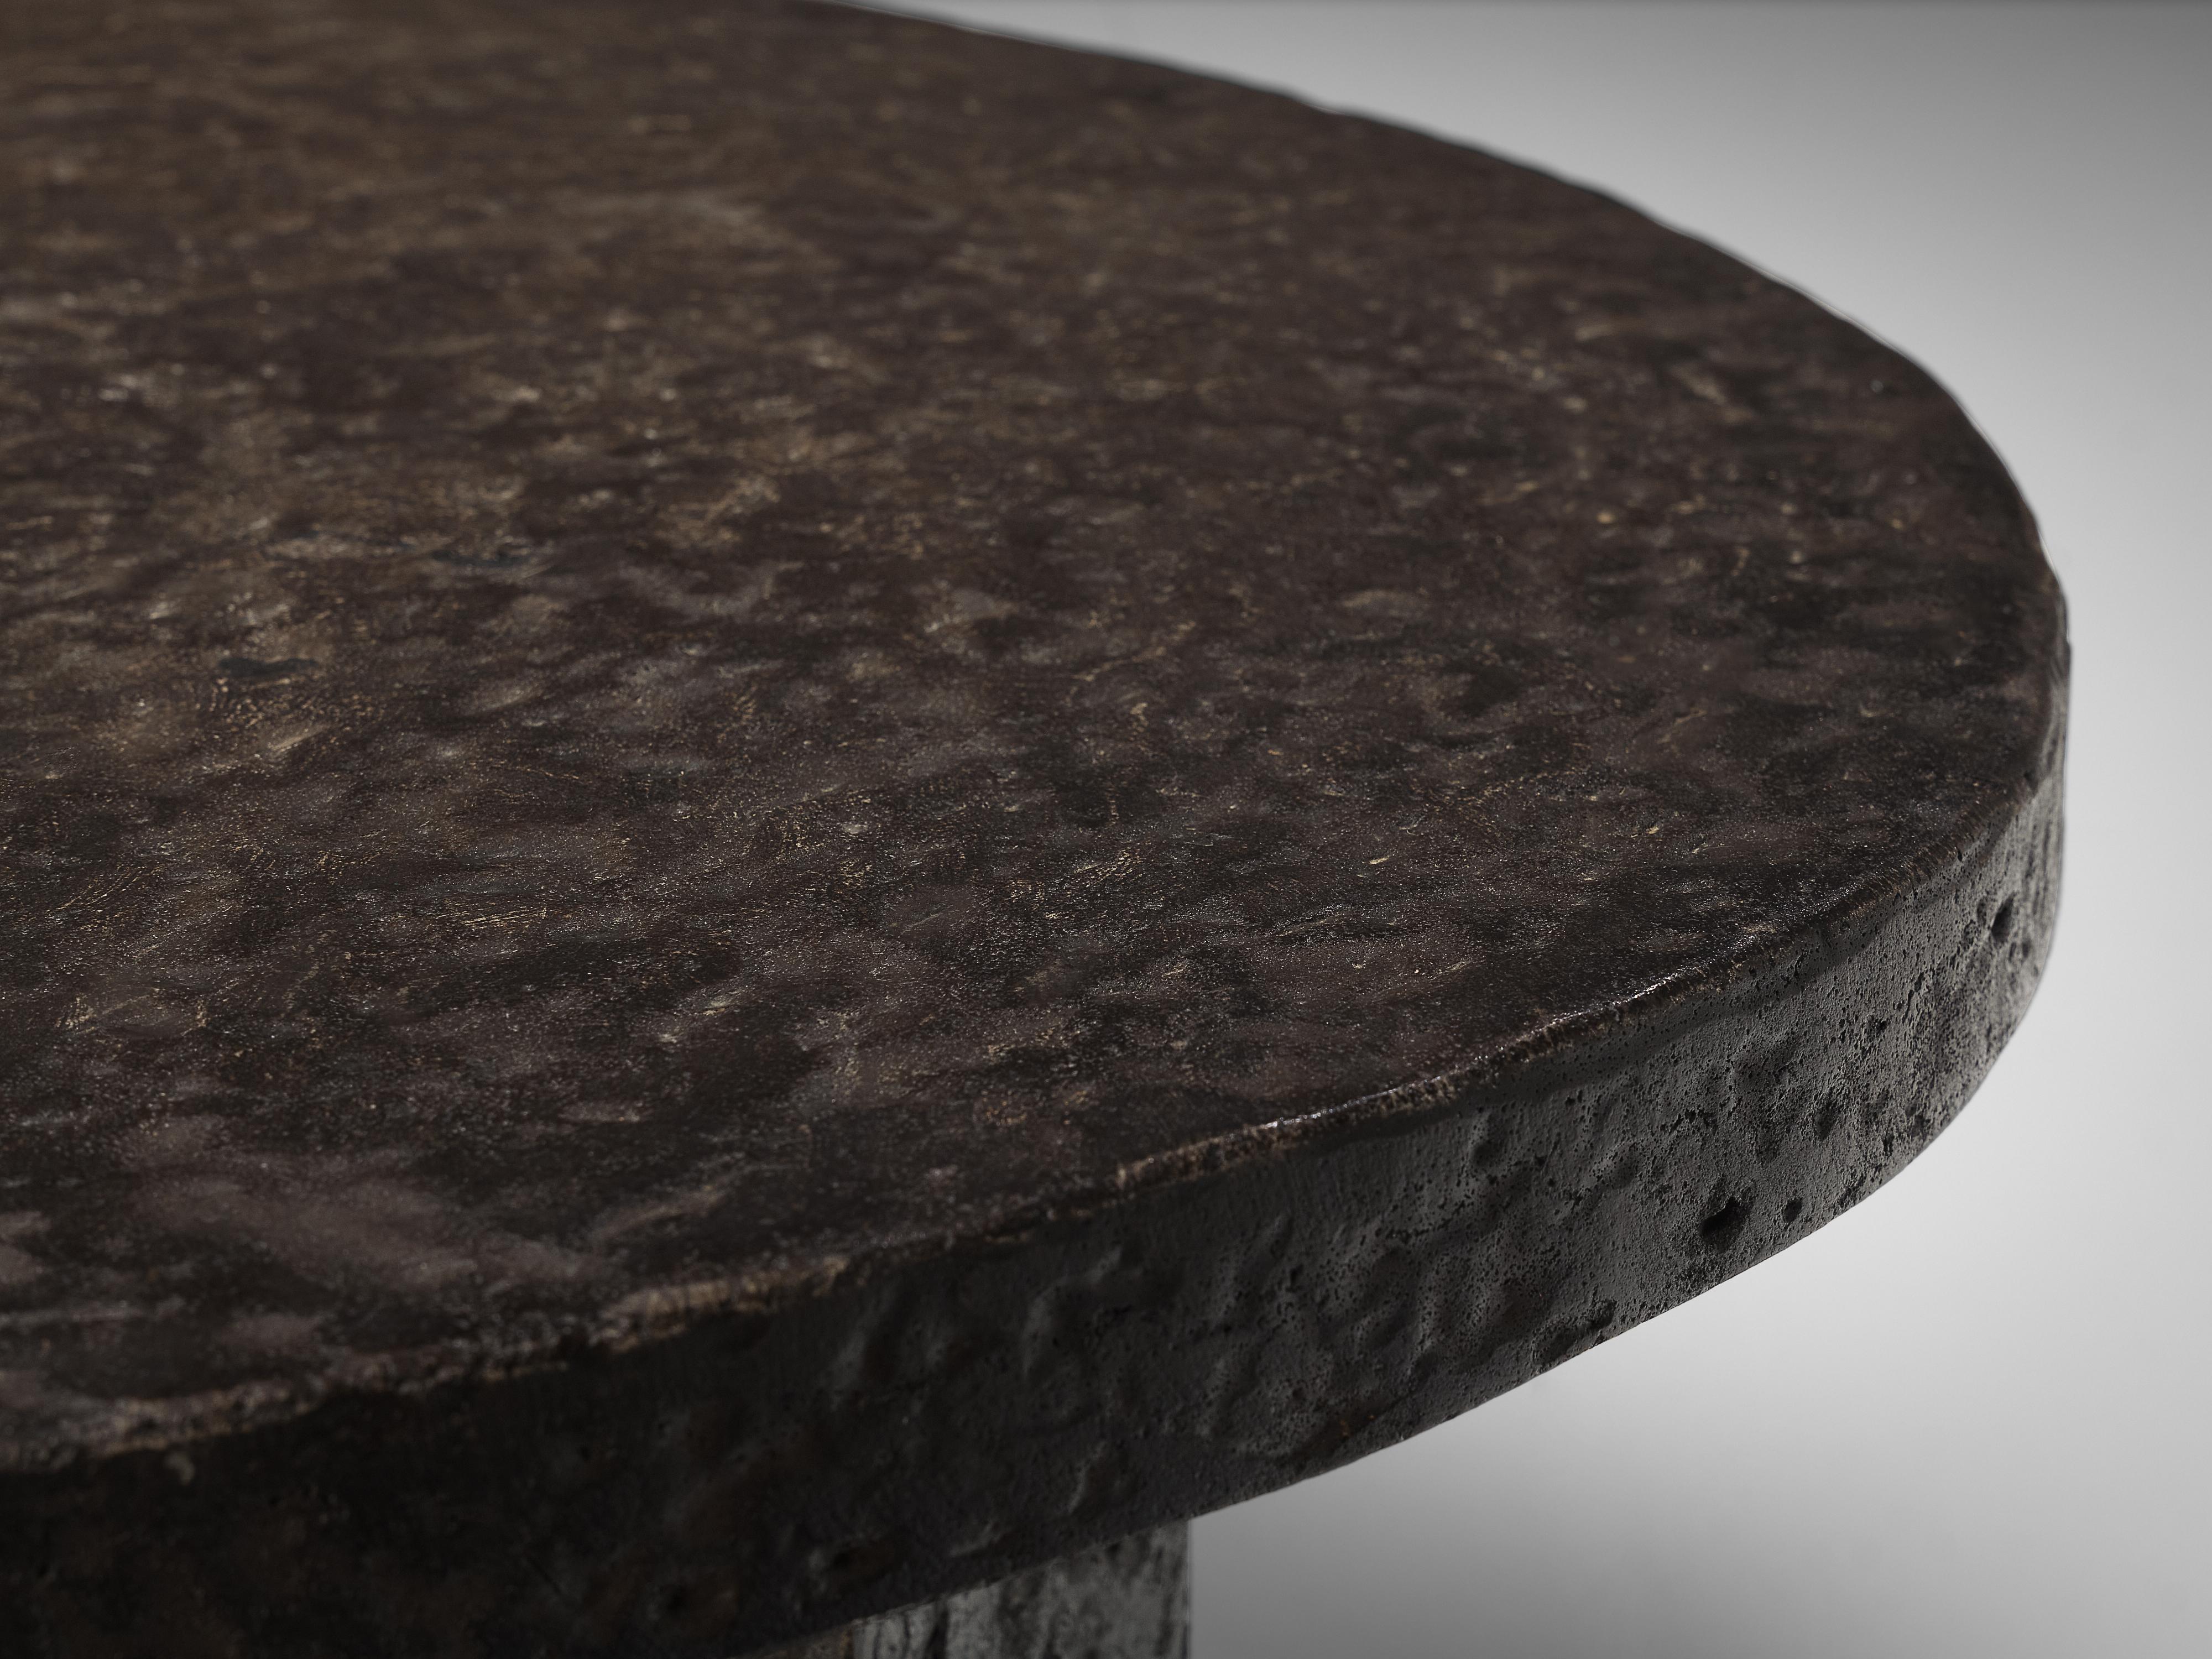 European Round Brutalist Coffee Table with Stone Look